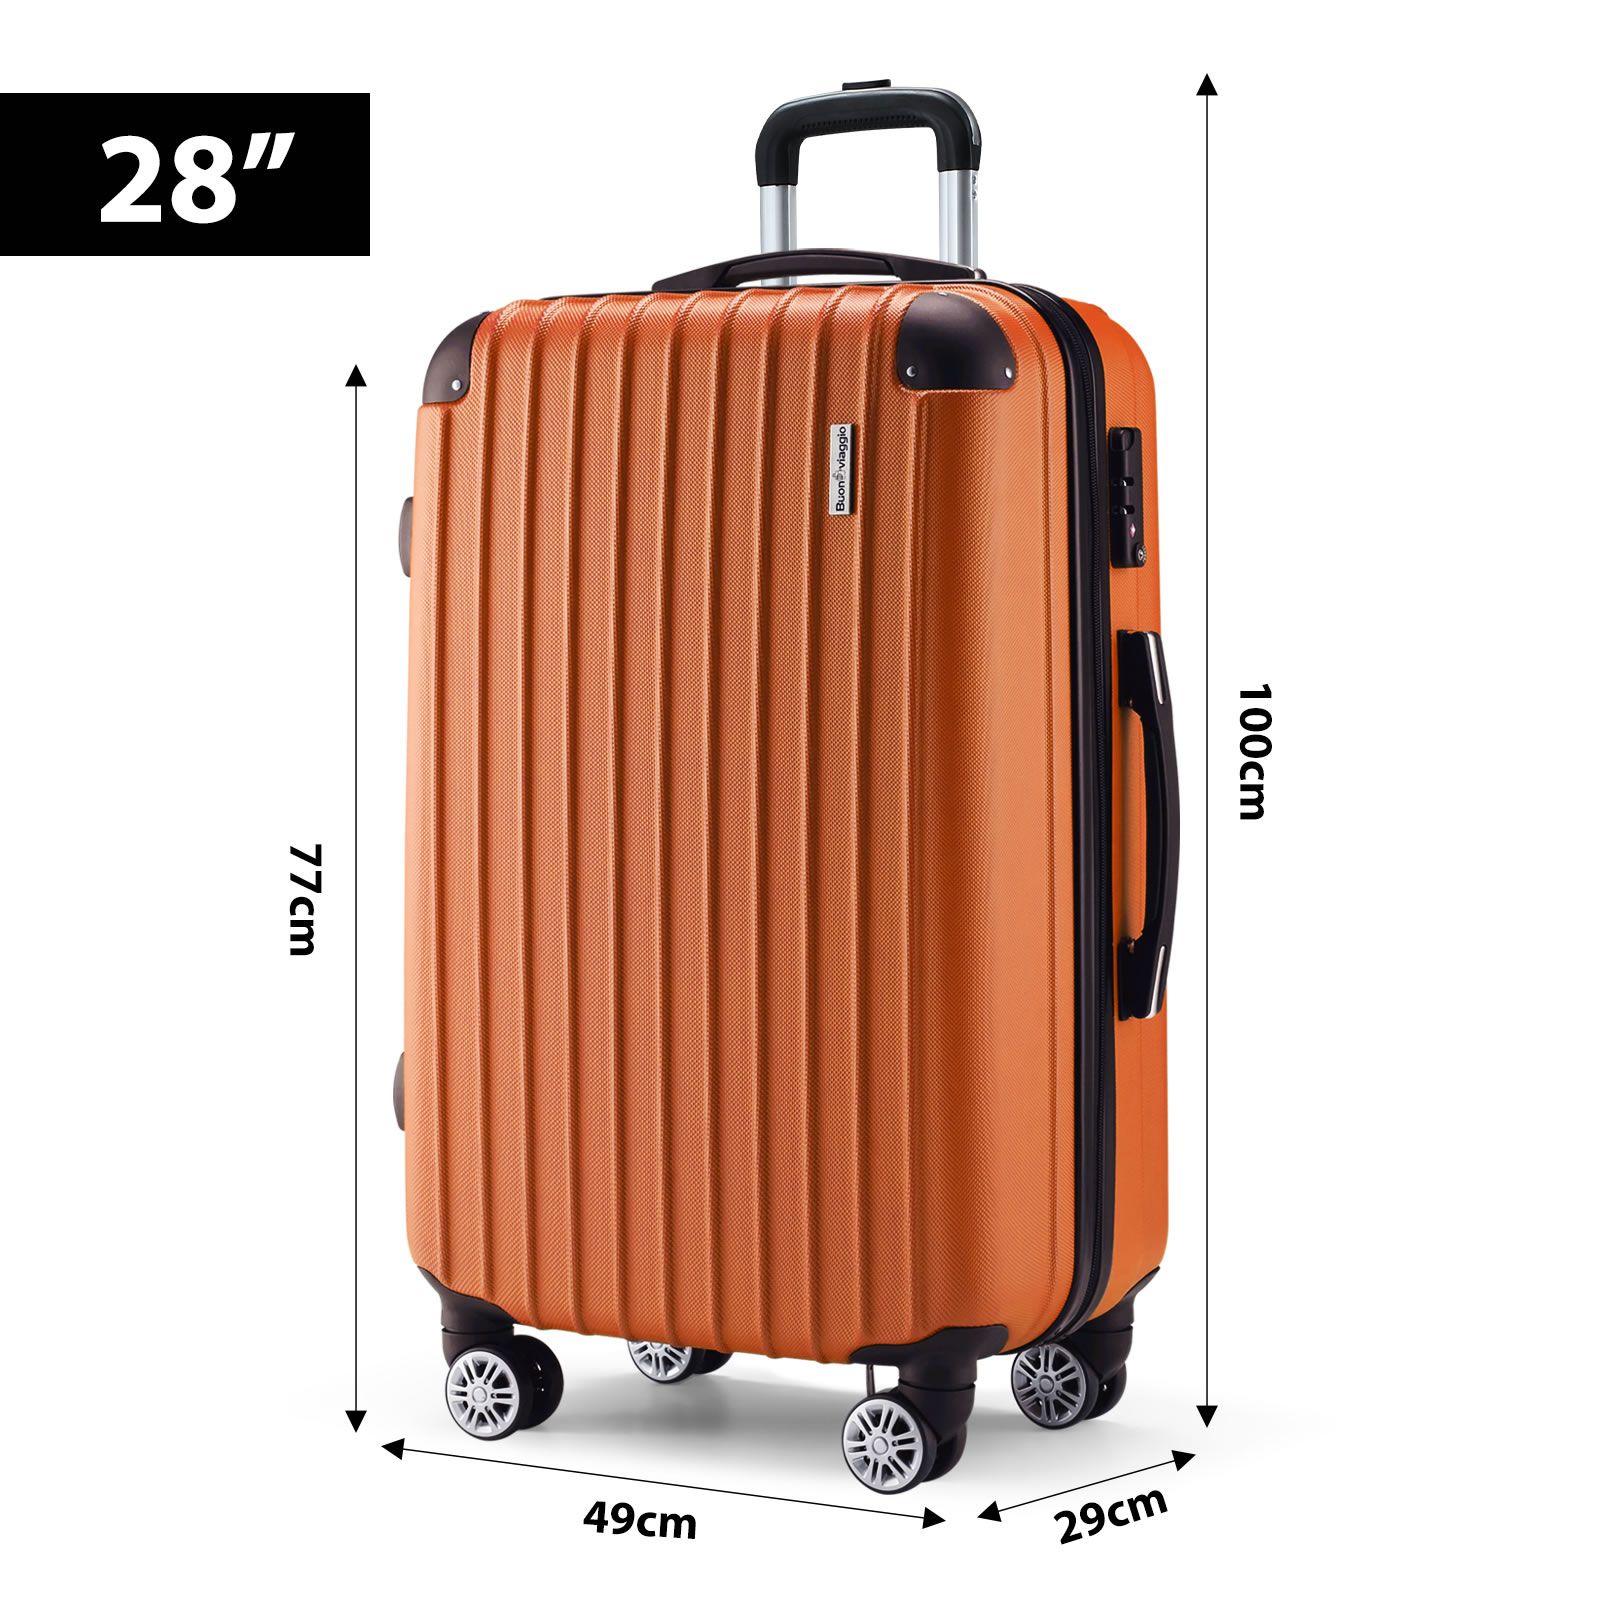 Carry On Luggage Suitcase Travel Travaller Bag Hard Shell Case Lightweight Travelling with Wheels Checked Rolling Trolley TSA Lock Orange